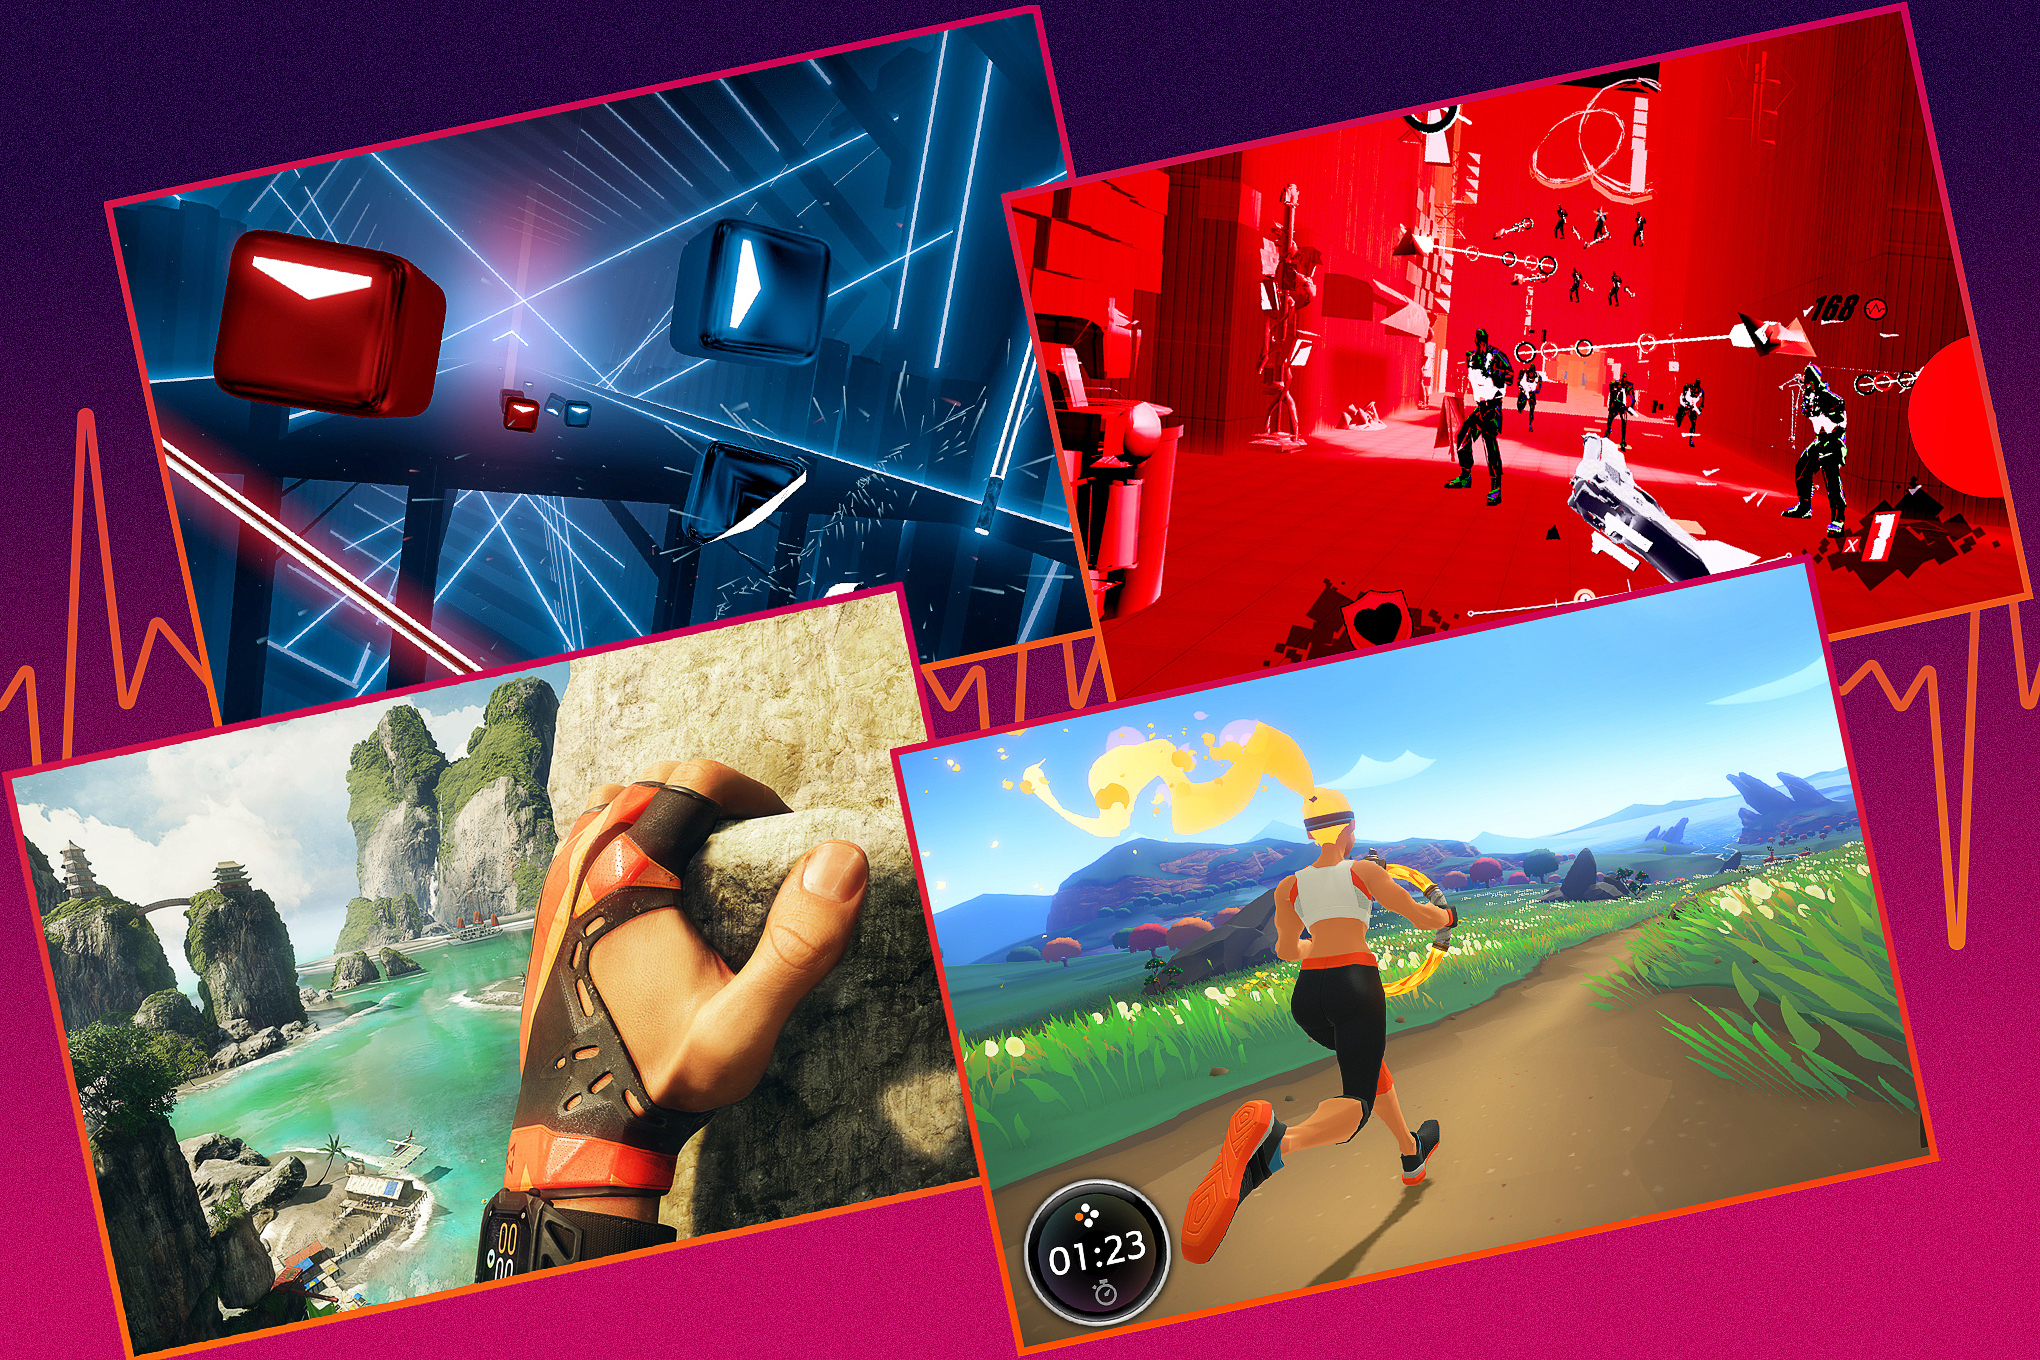 Grid of images from four fitness games (left top to bottom right) Beat Saber, Pistol Whip, The Climb, and Nintendo’s Ring Fit Adventure